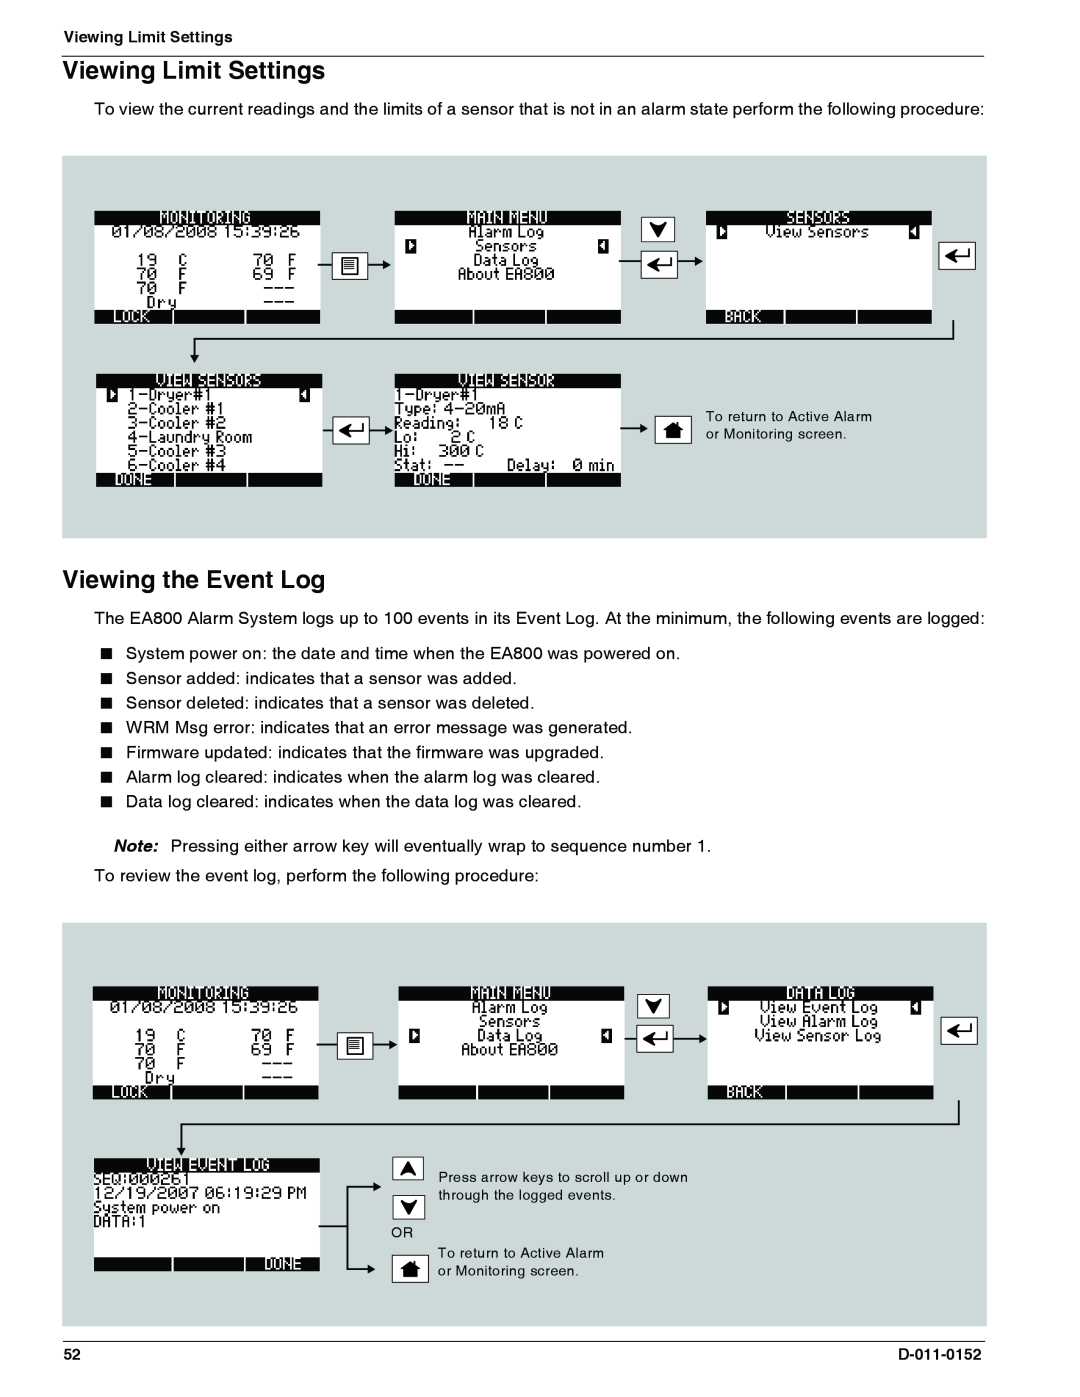 Enviro EA800 owner manual Viewing Limit Settings, Viewing the Event Log 